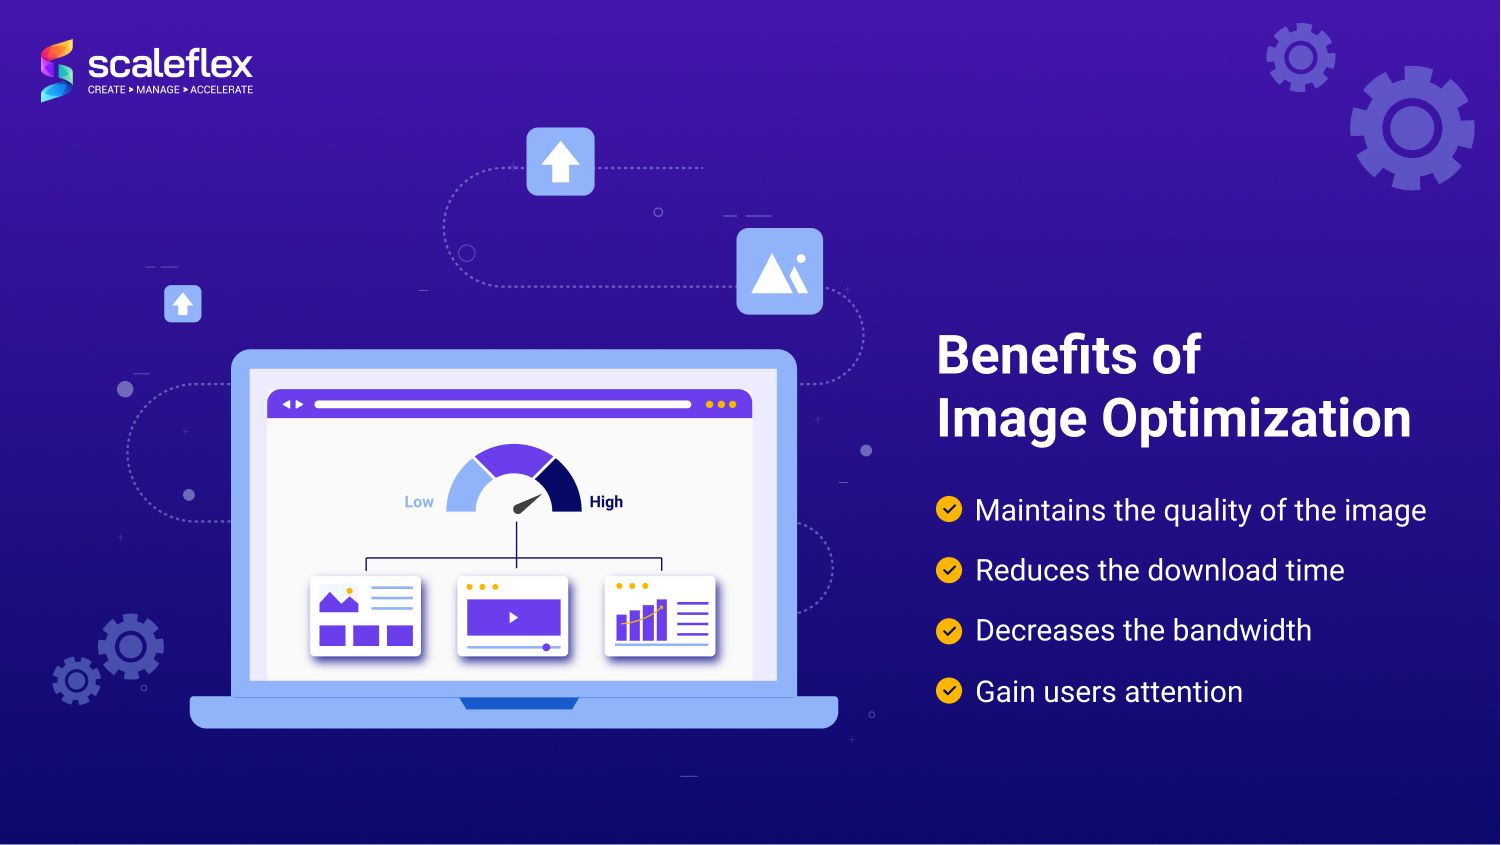 The benefits of Image Optimization to websites